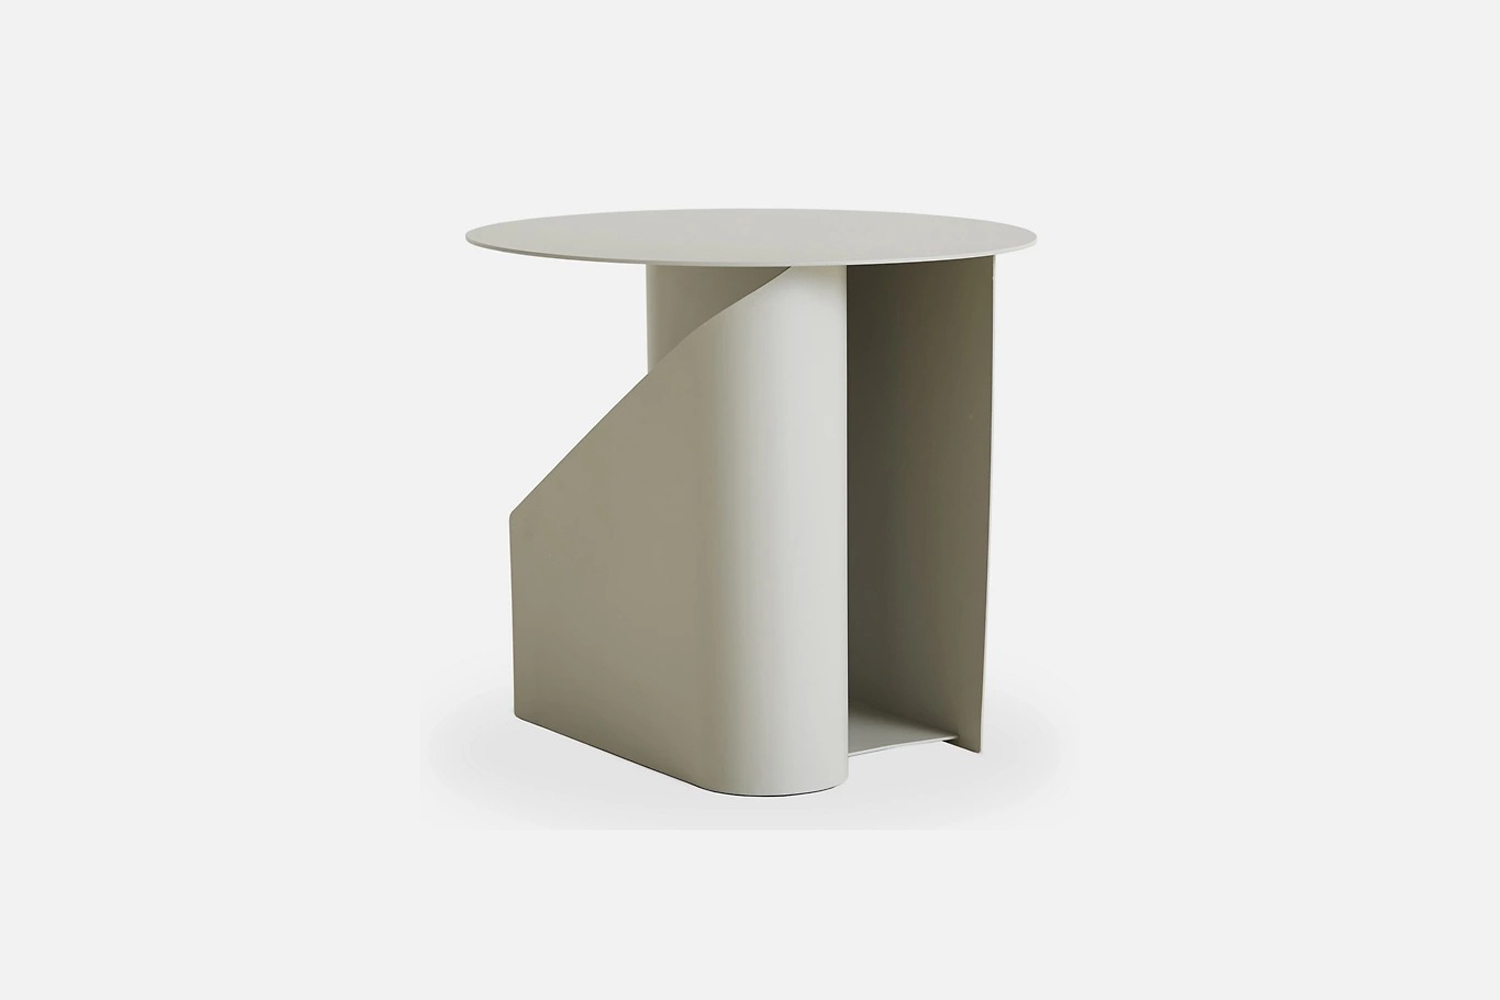 designed by woud, the sentrum side table in warm grey is \$599 at lumens. 21